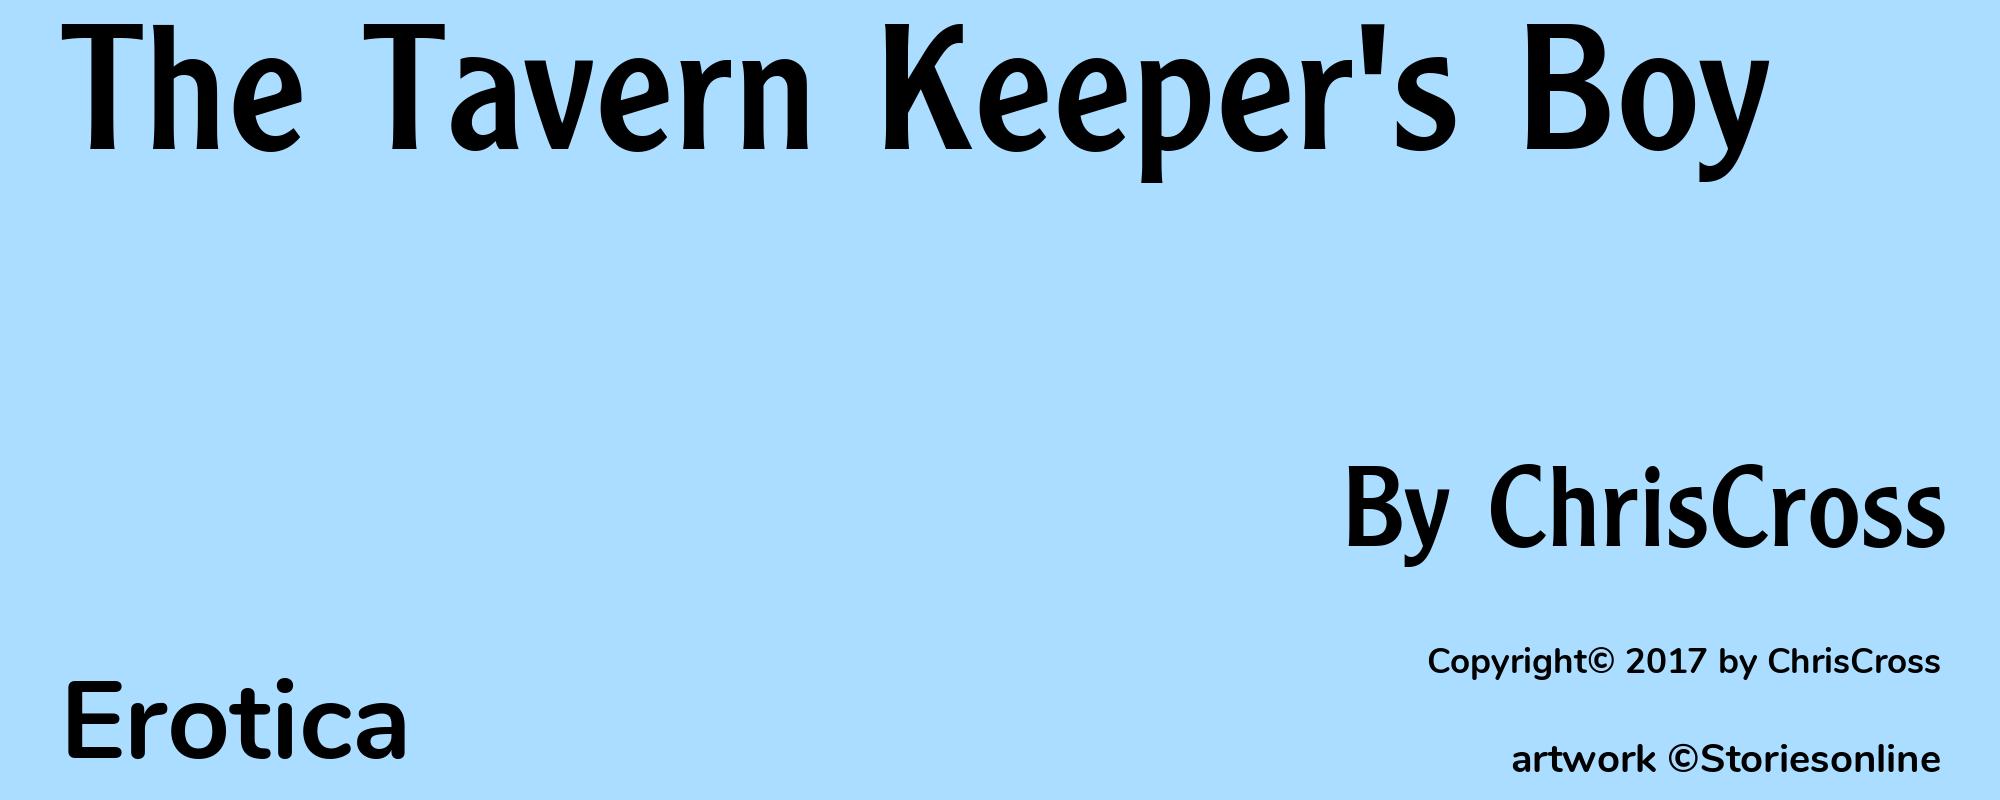 The Tavern Keeper's Boy - Cover